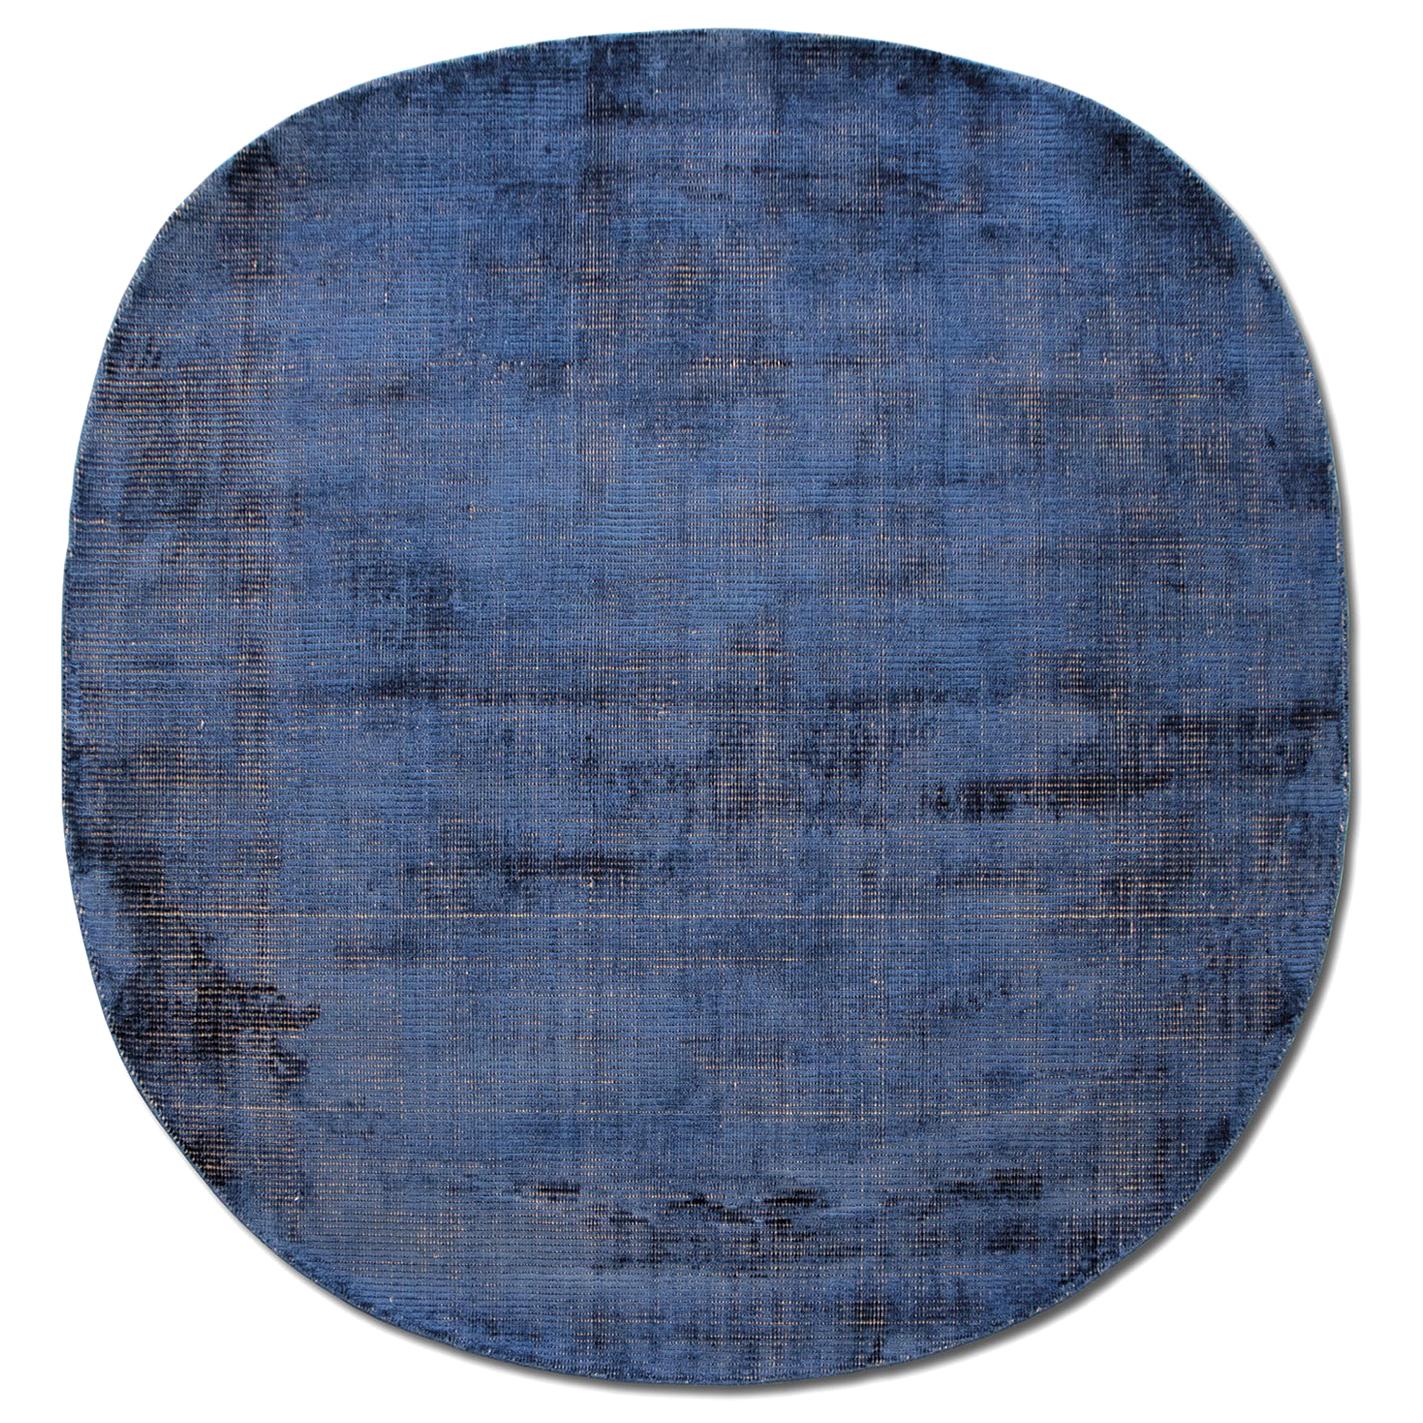 Contemporary Natural Shiny Blue Pure Silk Rug by Deanna Comelllini 180x190 cm For Sale